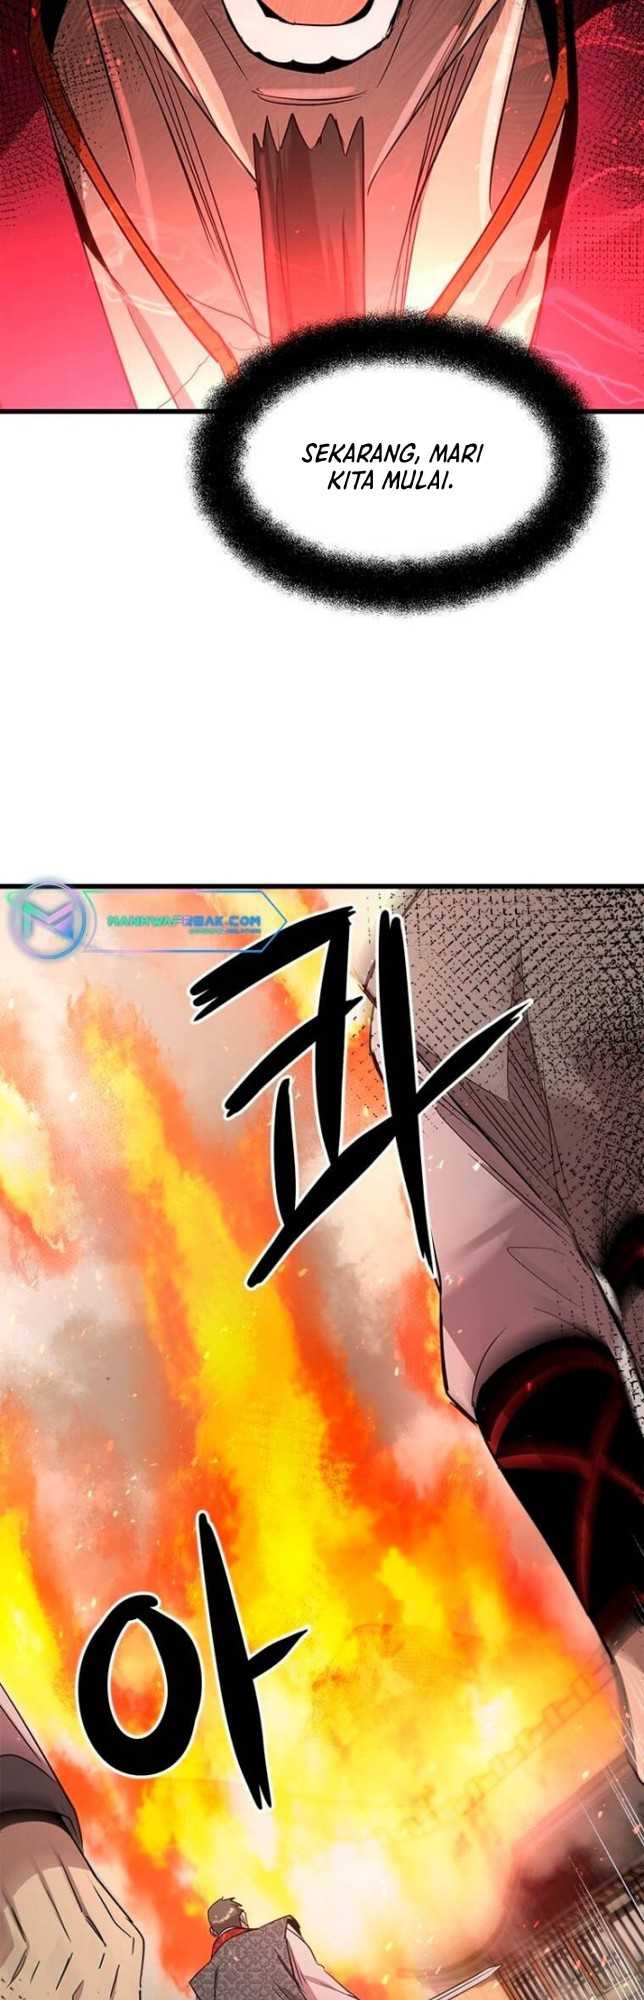 Strongest Fighter Chapter 75